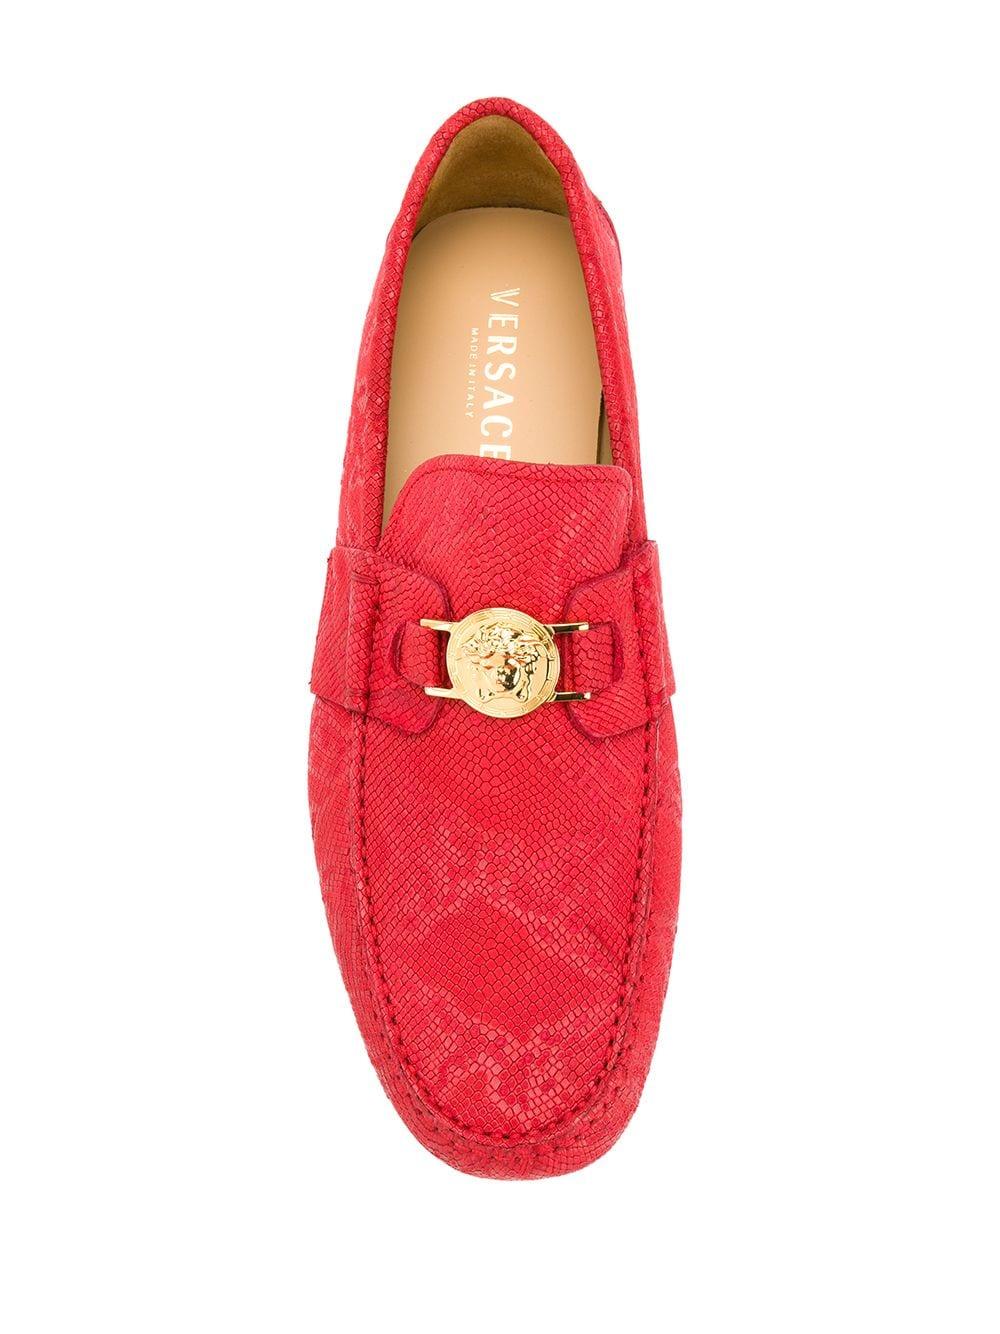 Versace Leather Medusa Loafers in Red 